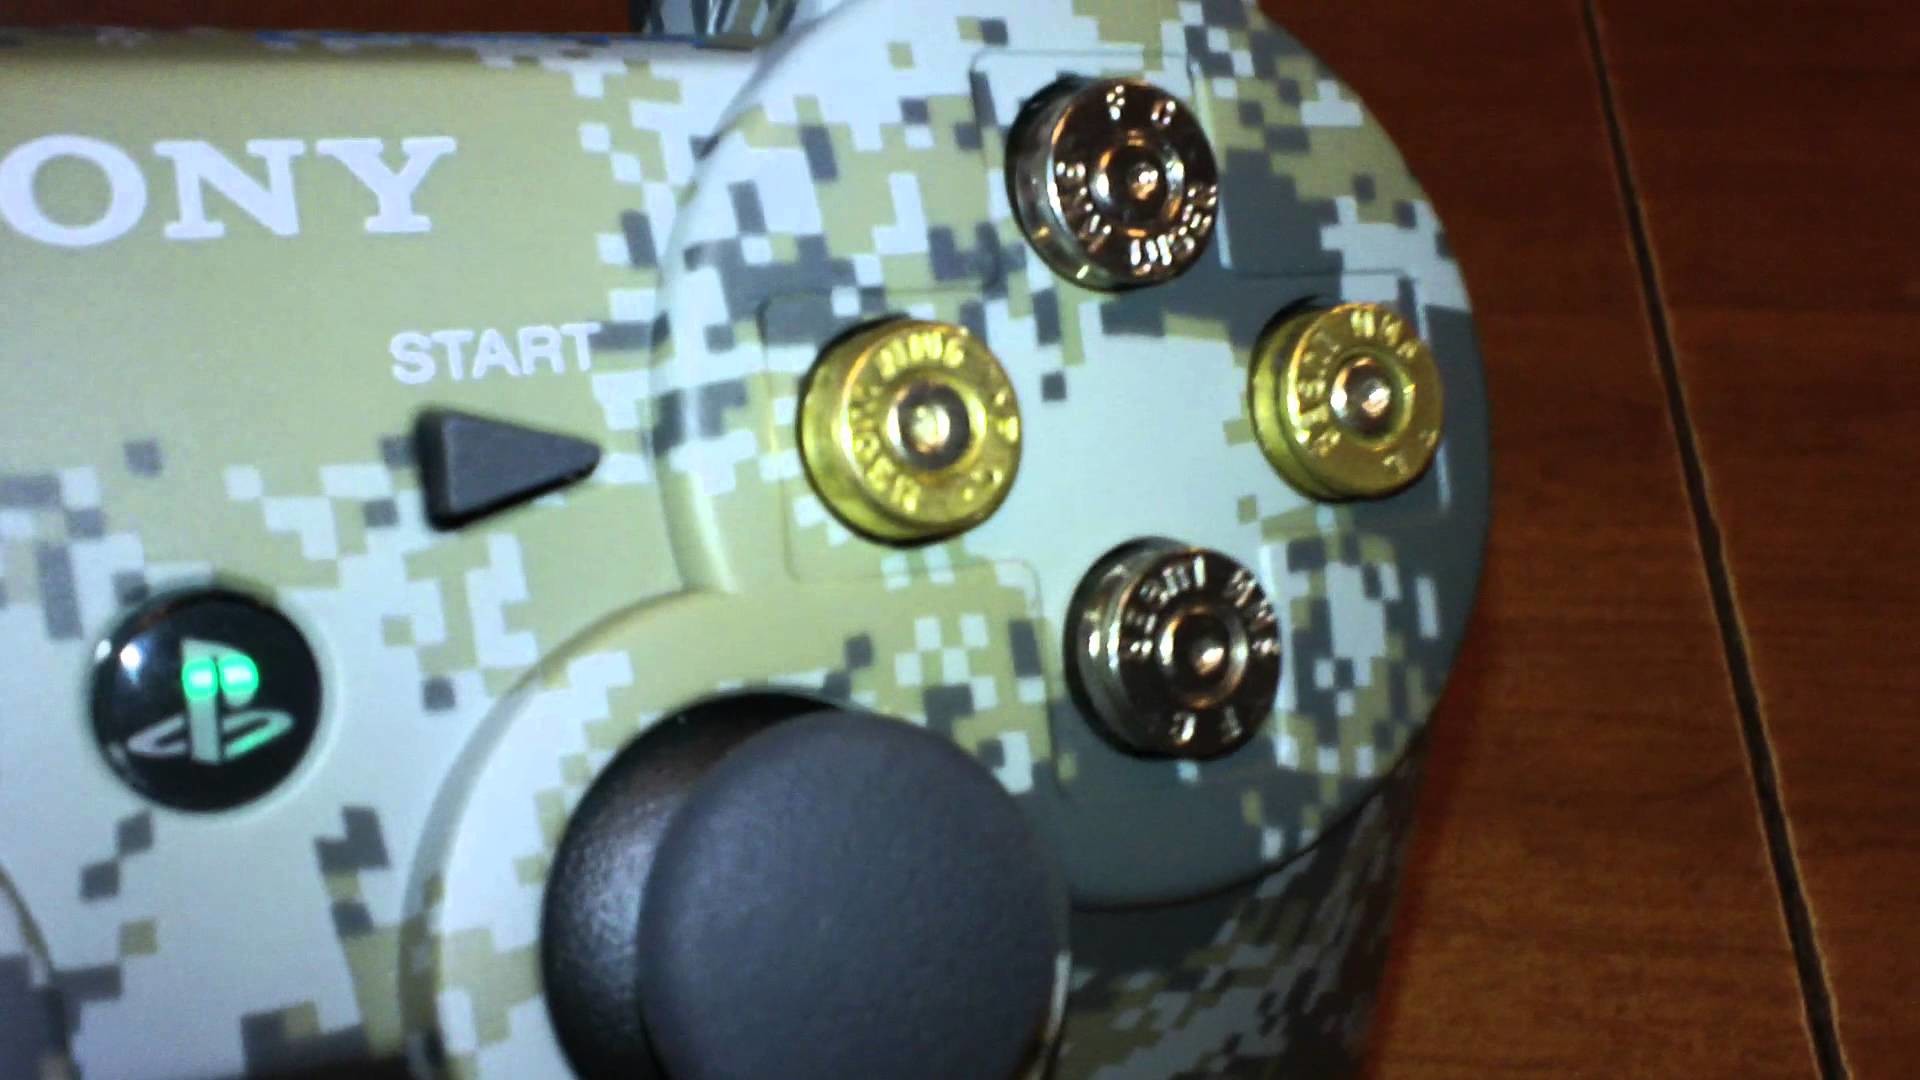 1920x1080 Custom Urban Camo Ps3 Controller With LED'S and Bullet Buttons [HD]